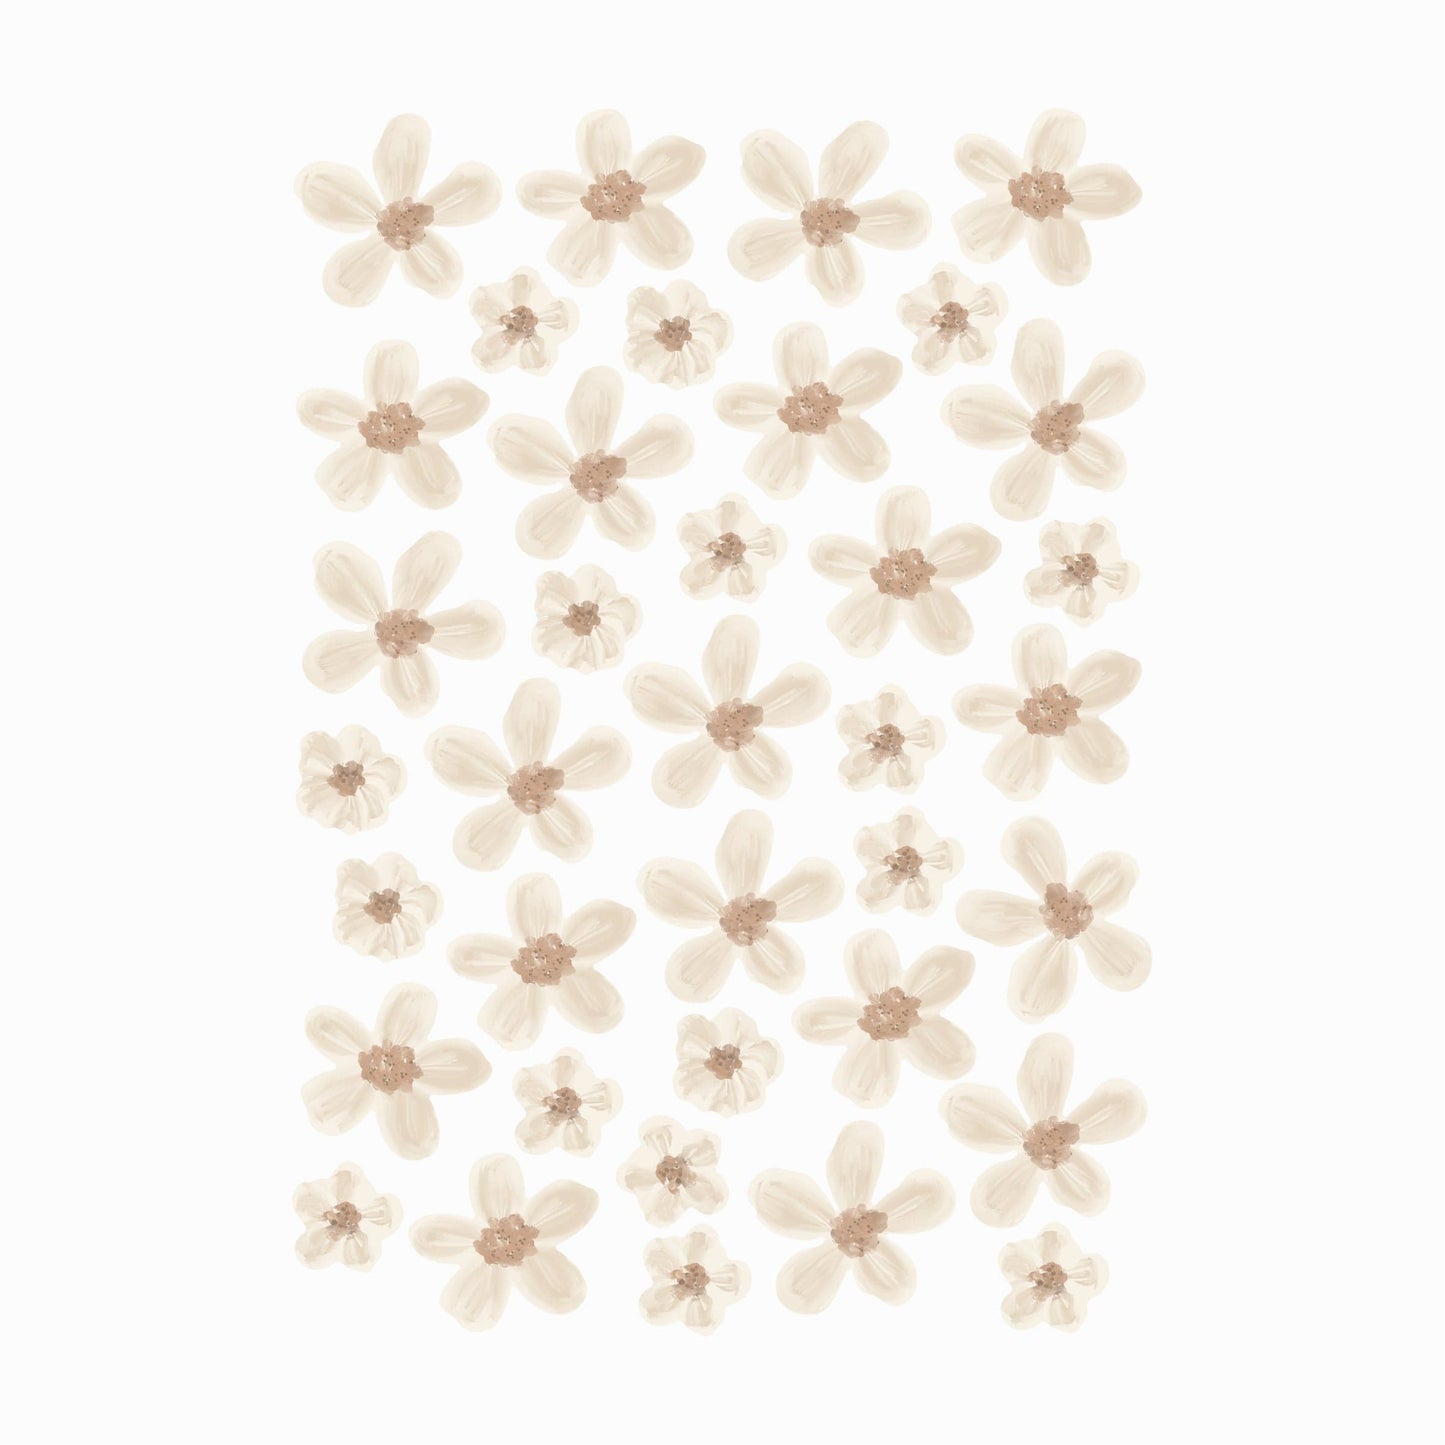 A sheet of our Murs Clairs Elle Flower stickers. Each sticker has a brown irregular centre with black specks. The petals are cream of varying tones with watercolour style details